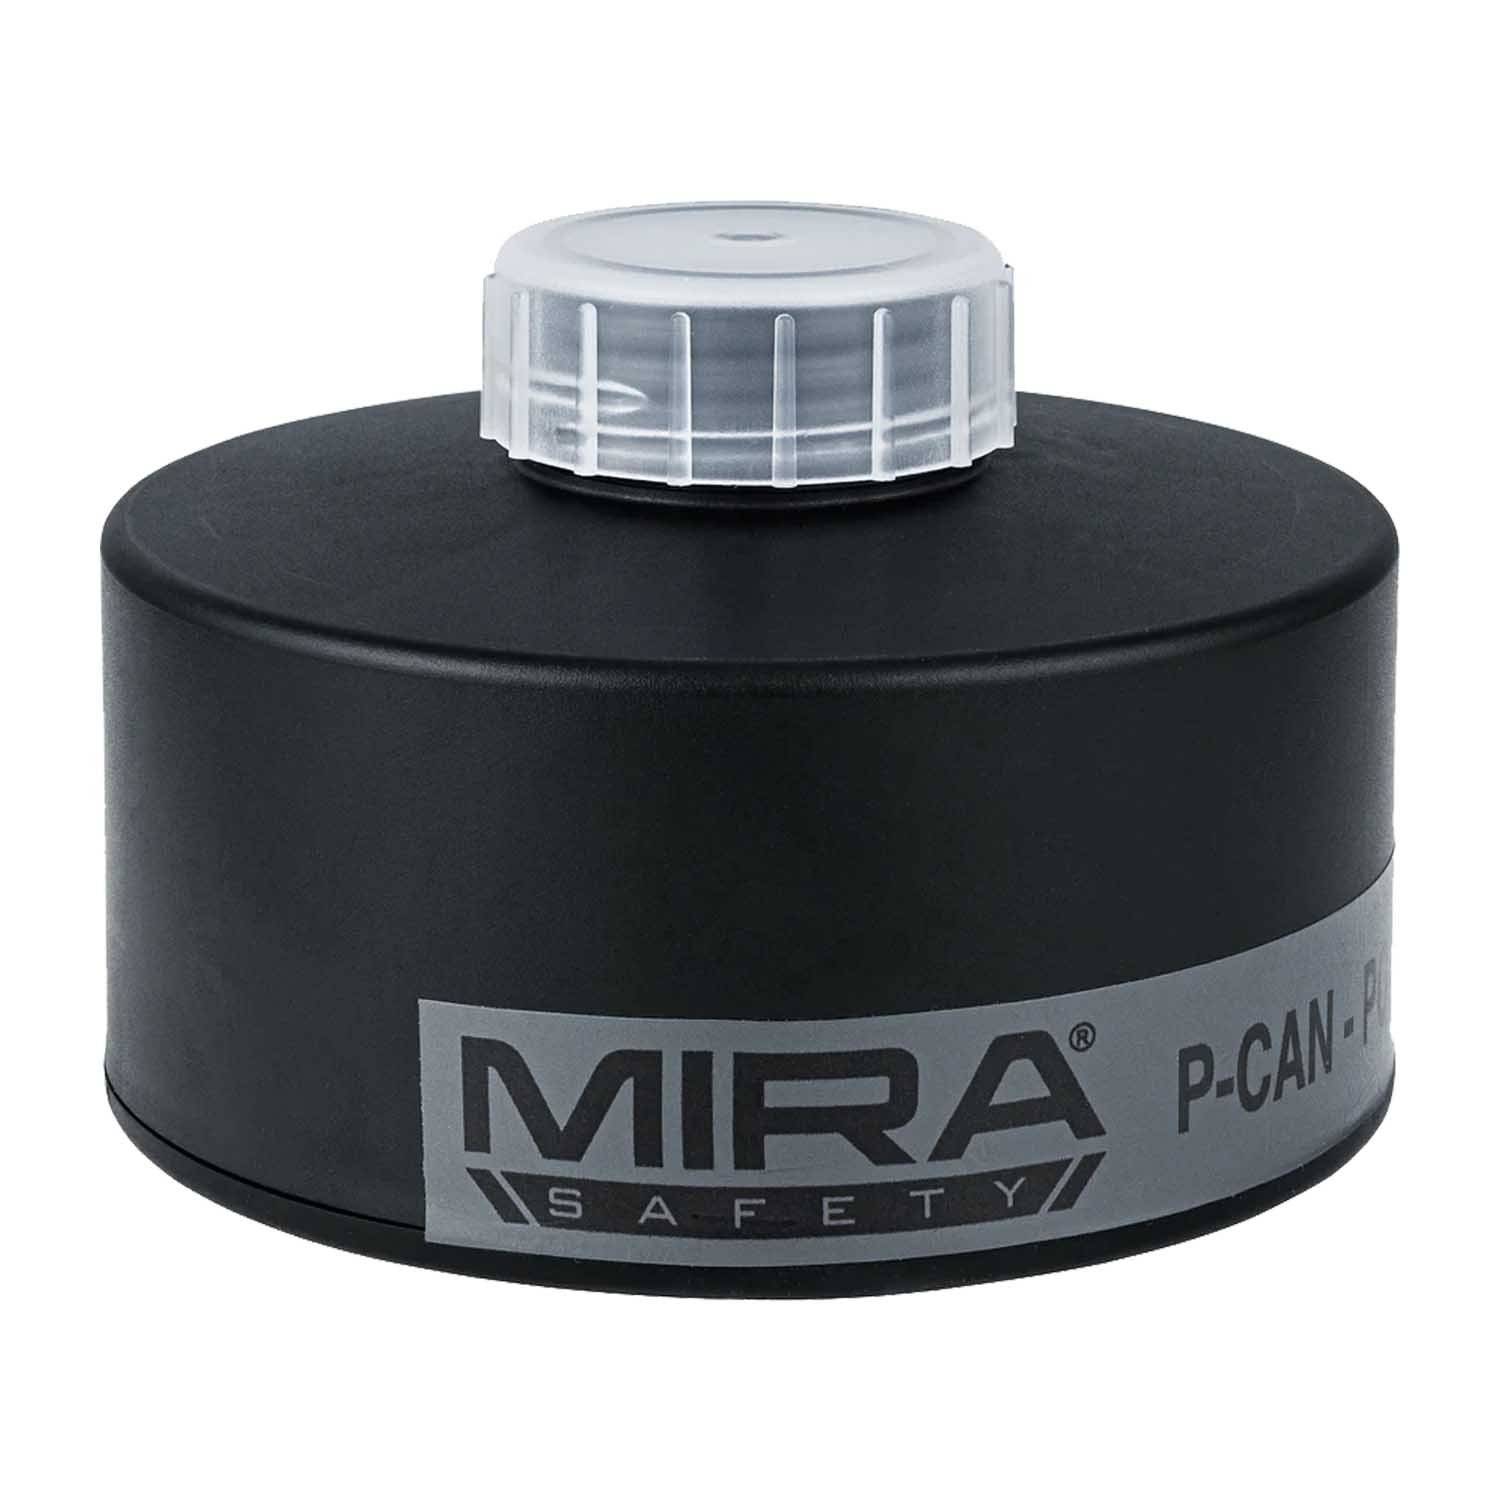 Mira Safety P-CAN Police Gas Mask Filter